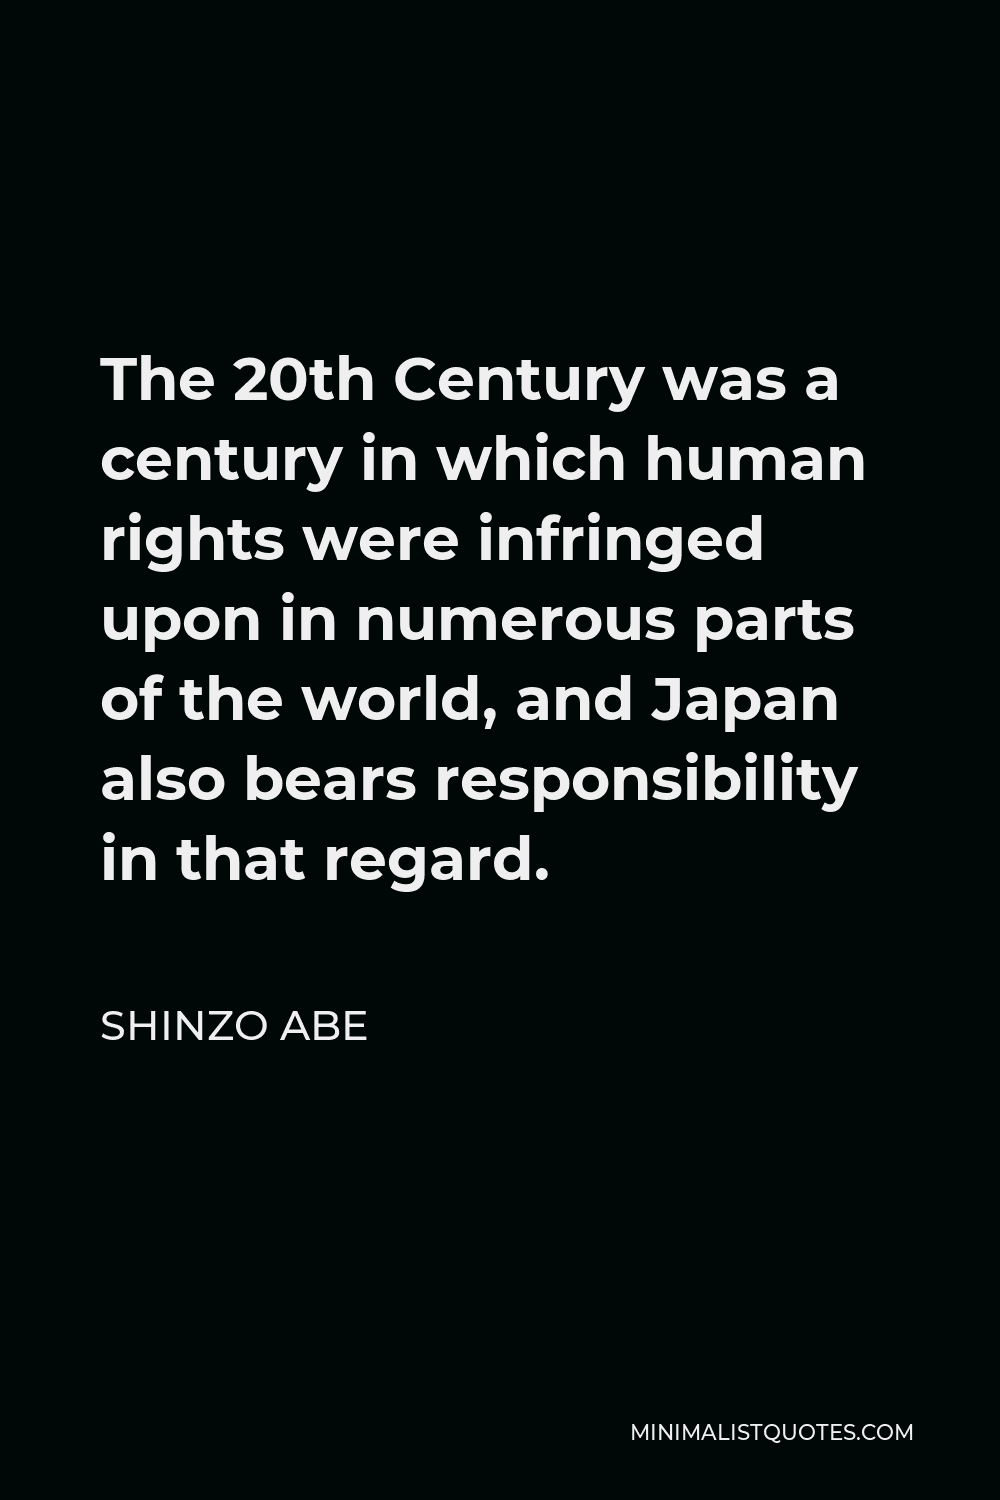 Shinzo Abe Quote - The 20th Century was a century in which human rights were infringed upon in numerous parts of the world, and Japan also bears responsibility in that regard.